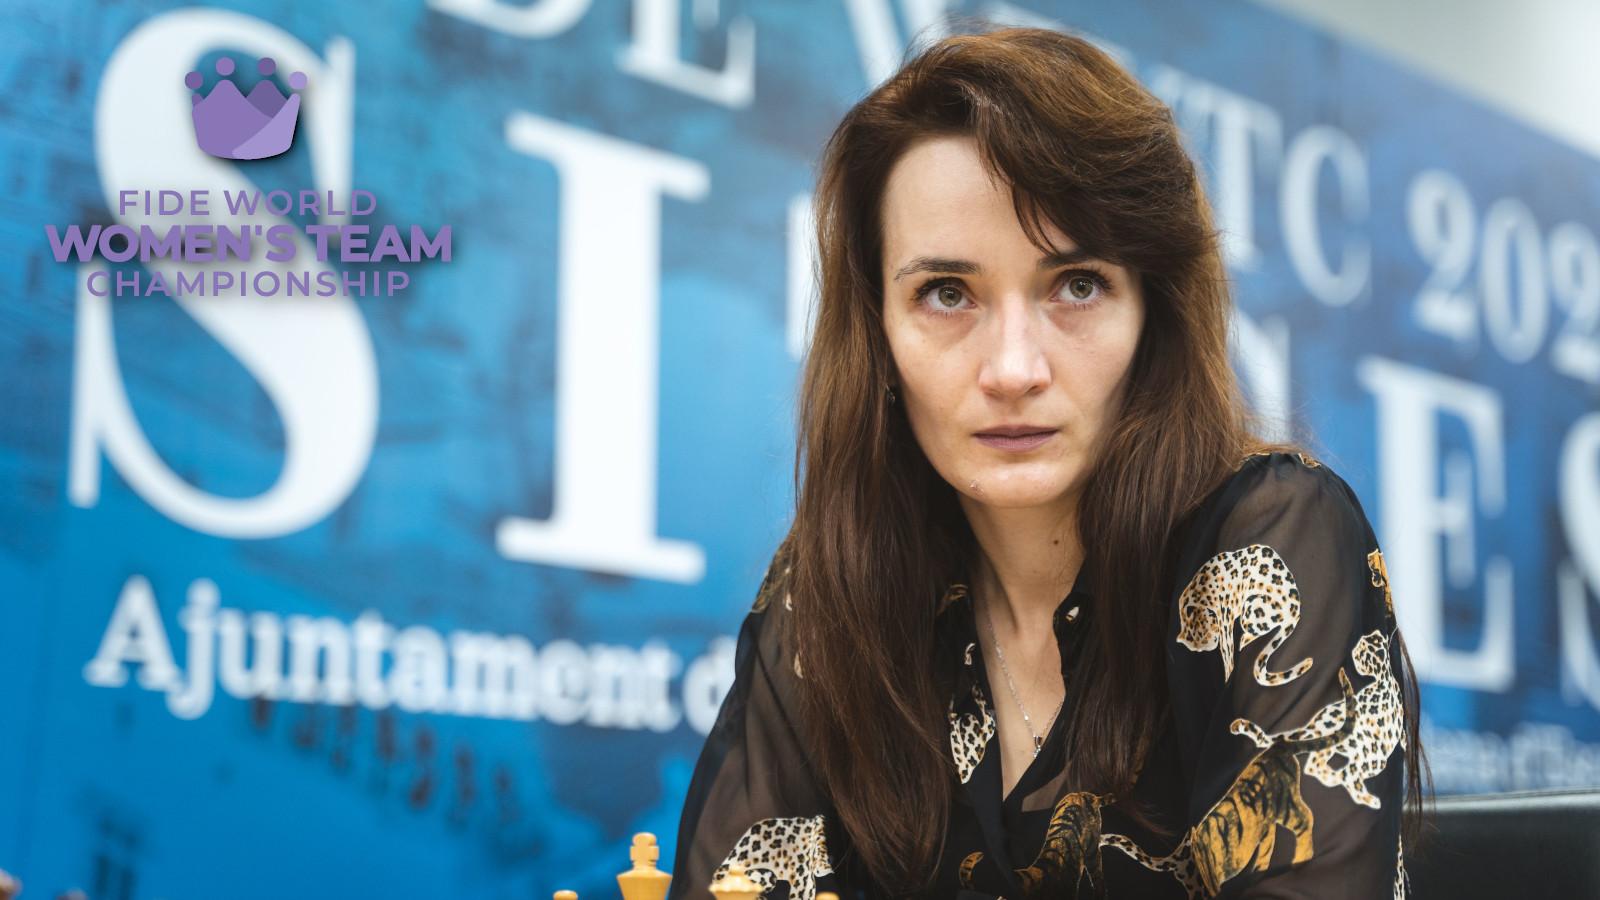 International Chess Federation on X: RT @EmilSutovsky: And now top-100  women chess players. Russia, China, Georgia, Ukraine, India are in the  lead.  / X